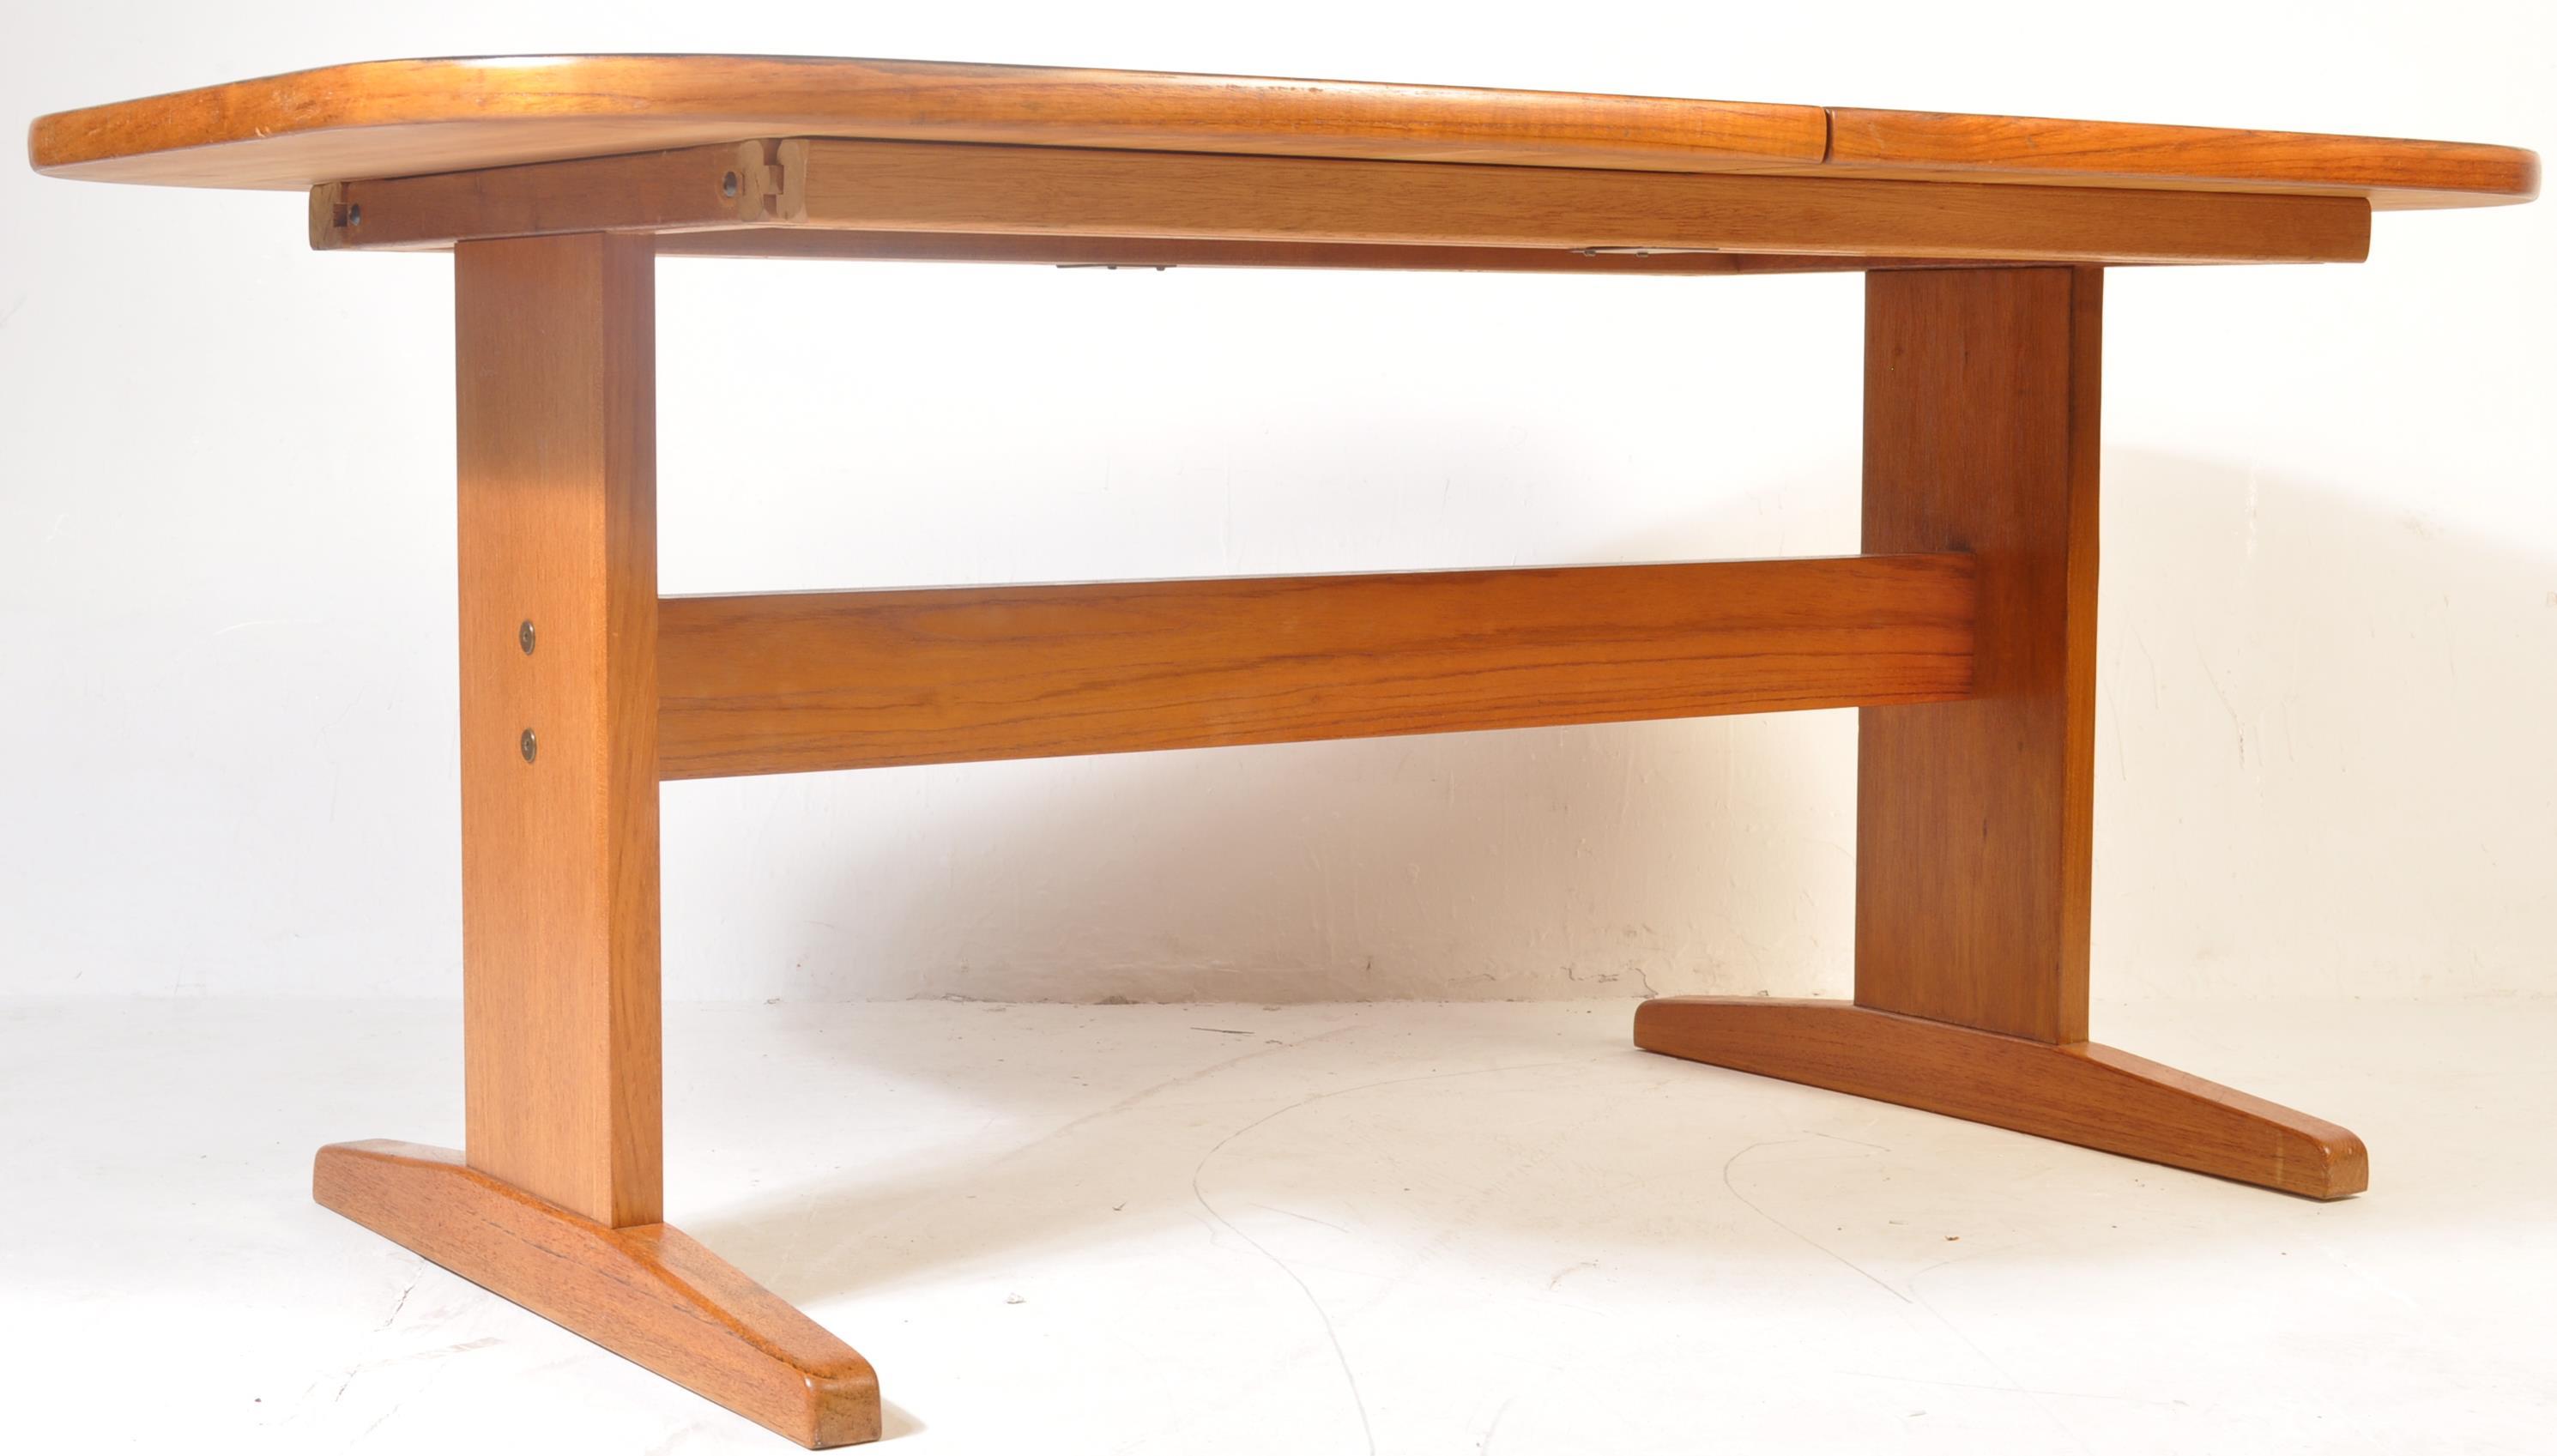 VINTAGE 20TH CENTURY DANISH EXTENDABLE DINING TABLE - Image 2 of 7